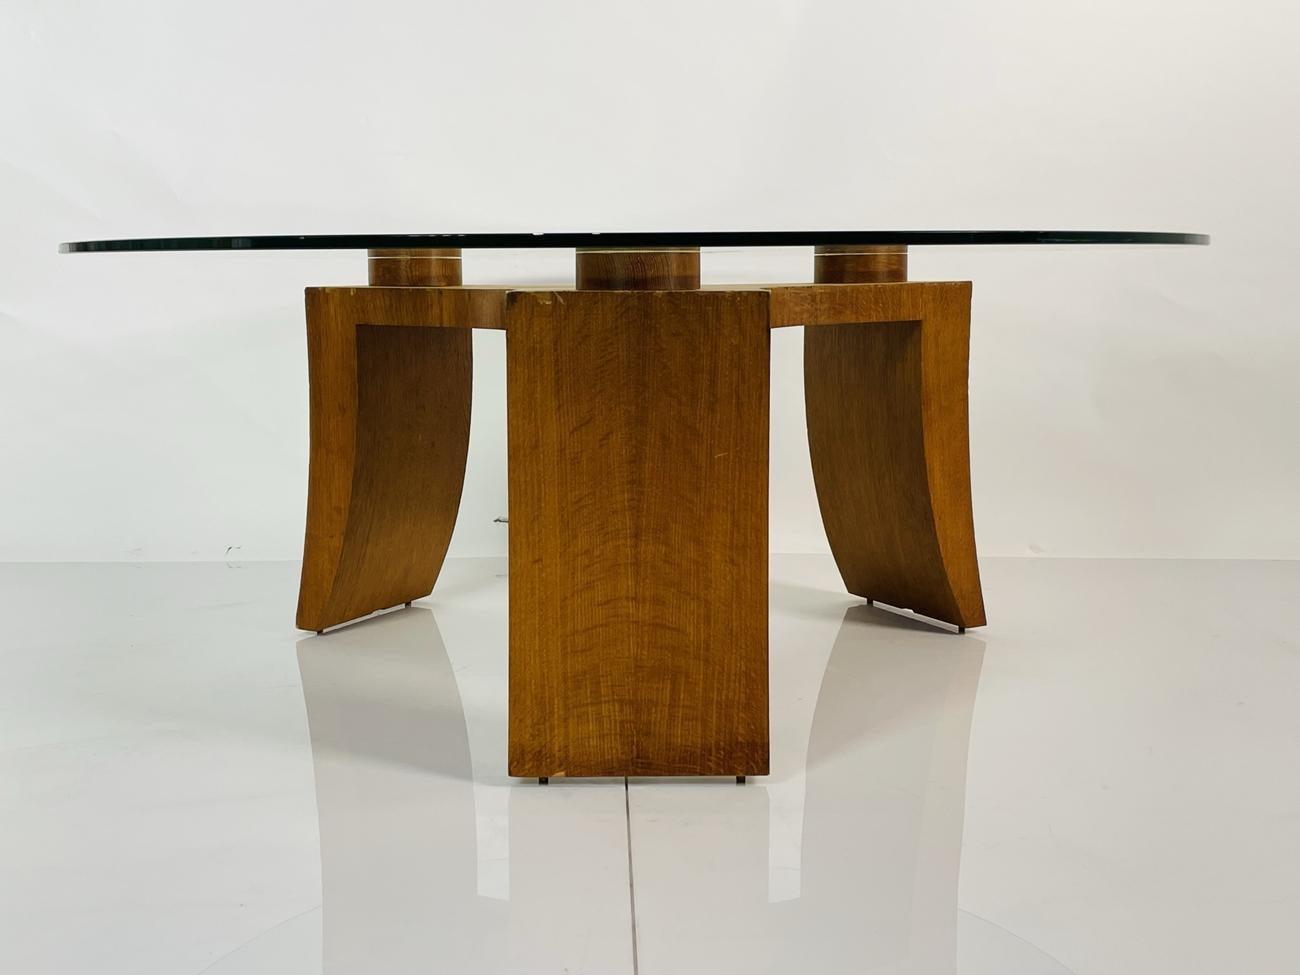 American Wood & Glass Coffee Table in the style of Vladimir Kagan